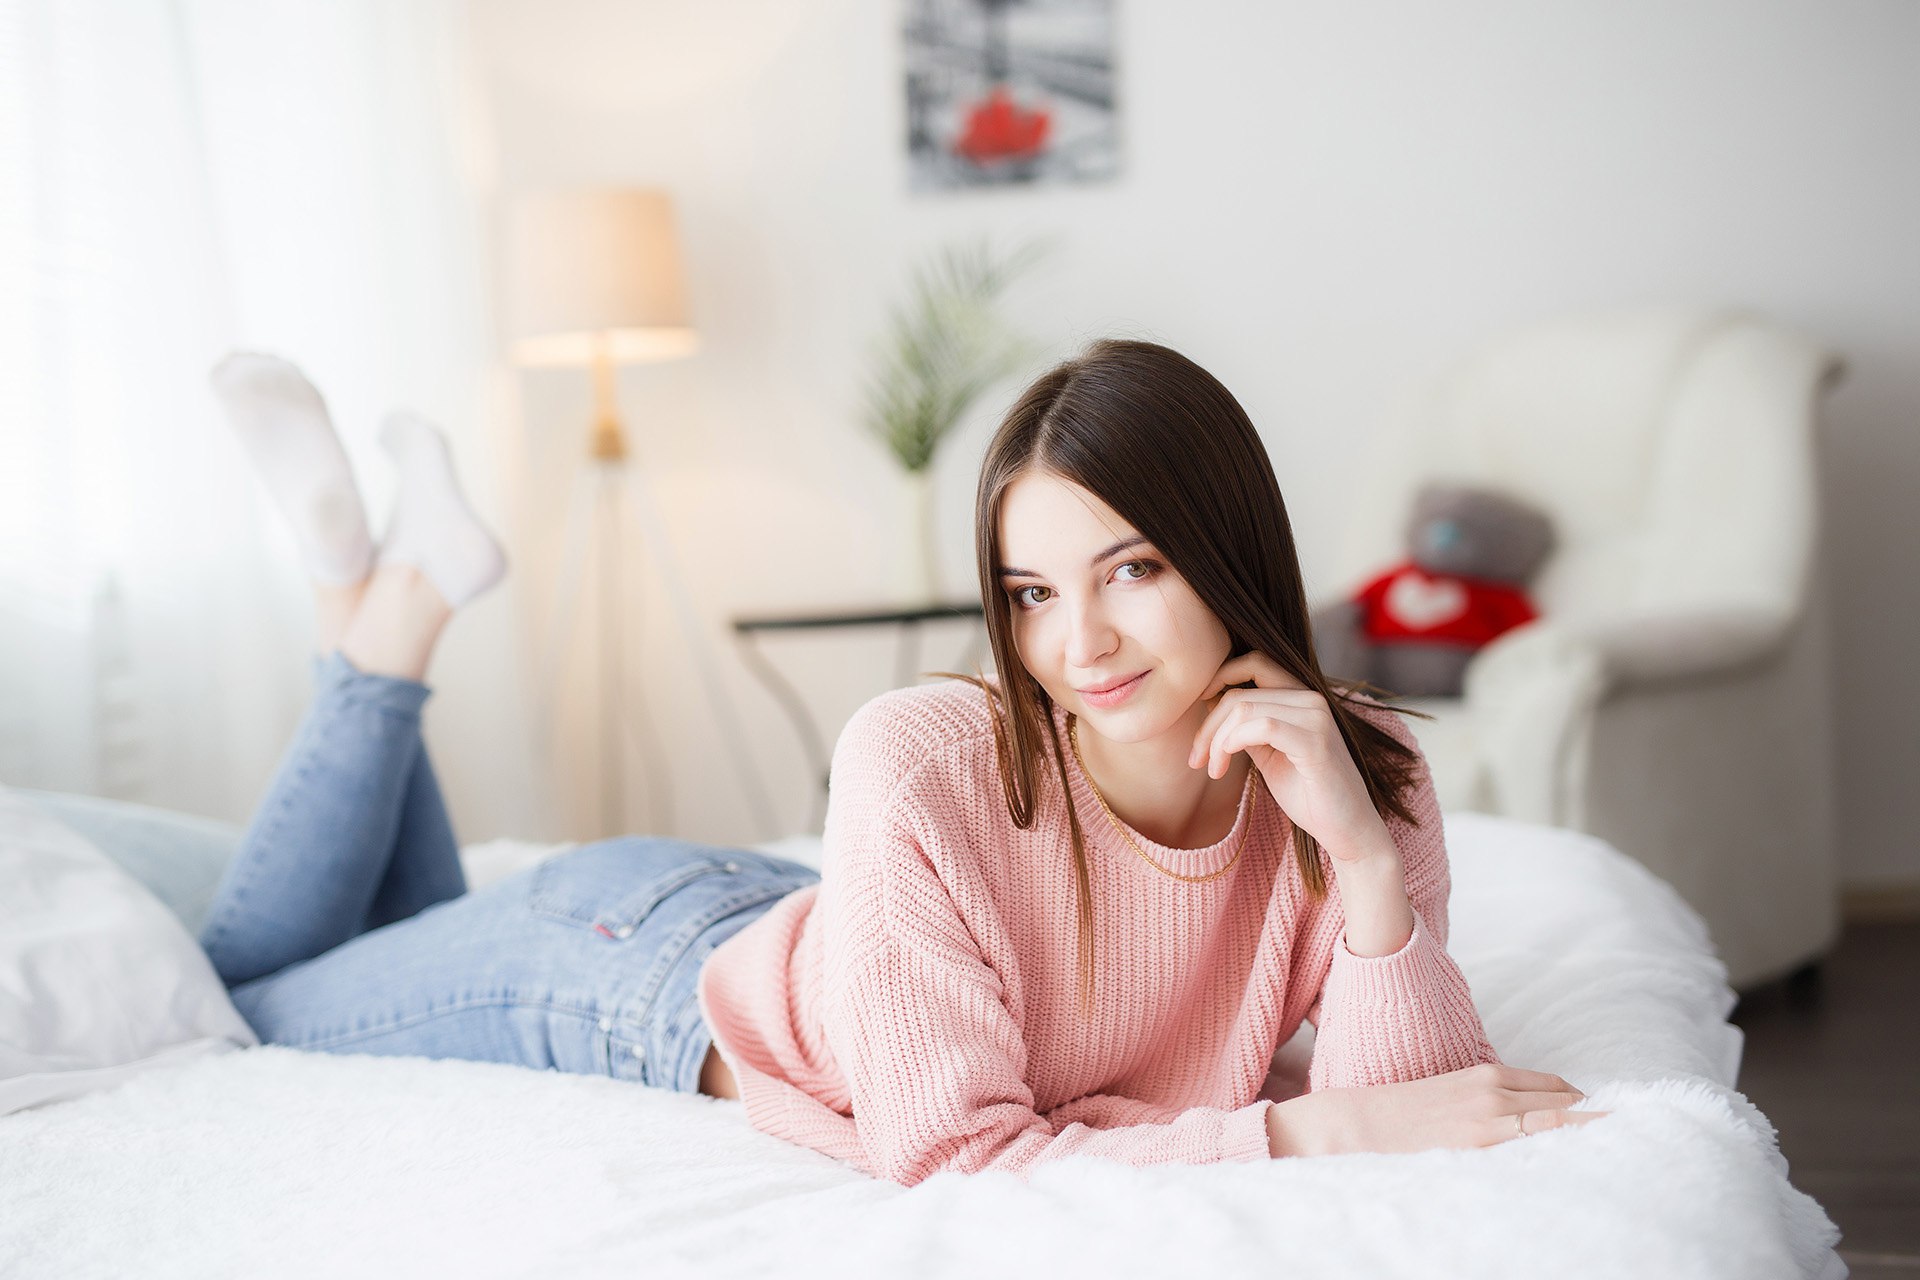 People 1920x1280 women model portrait indoors bed looking at viewer lying on front in bed jeans socks sweater depth of field feet in the air brunette smiling women indoors bedroom pink sweater touching face legs up young women